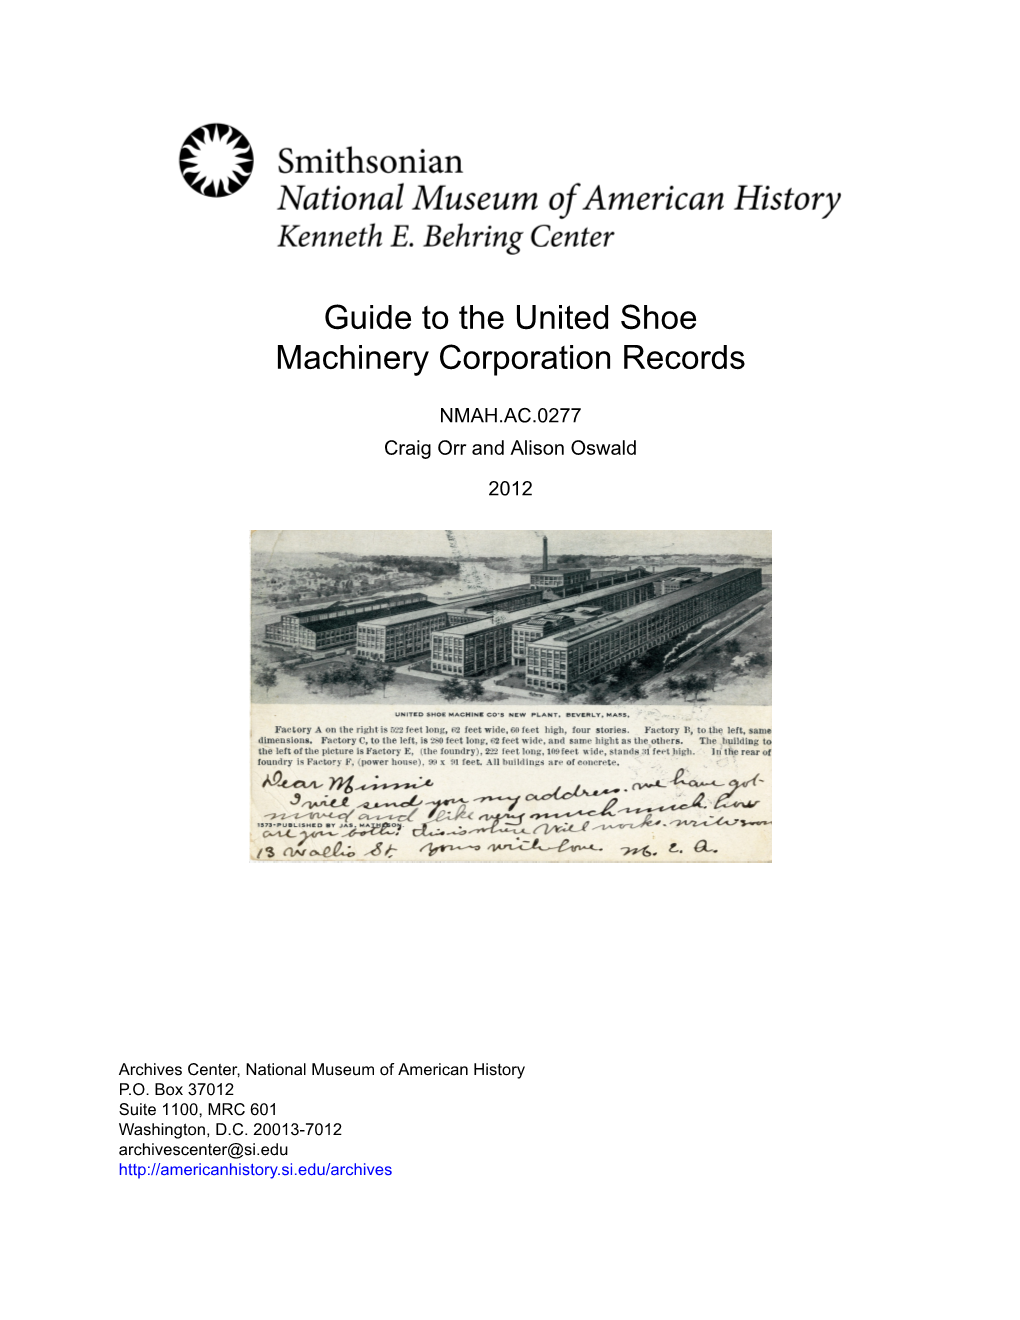 Guide to the United Shoe Machinery Corporation Records